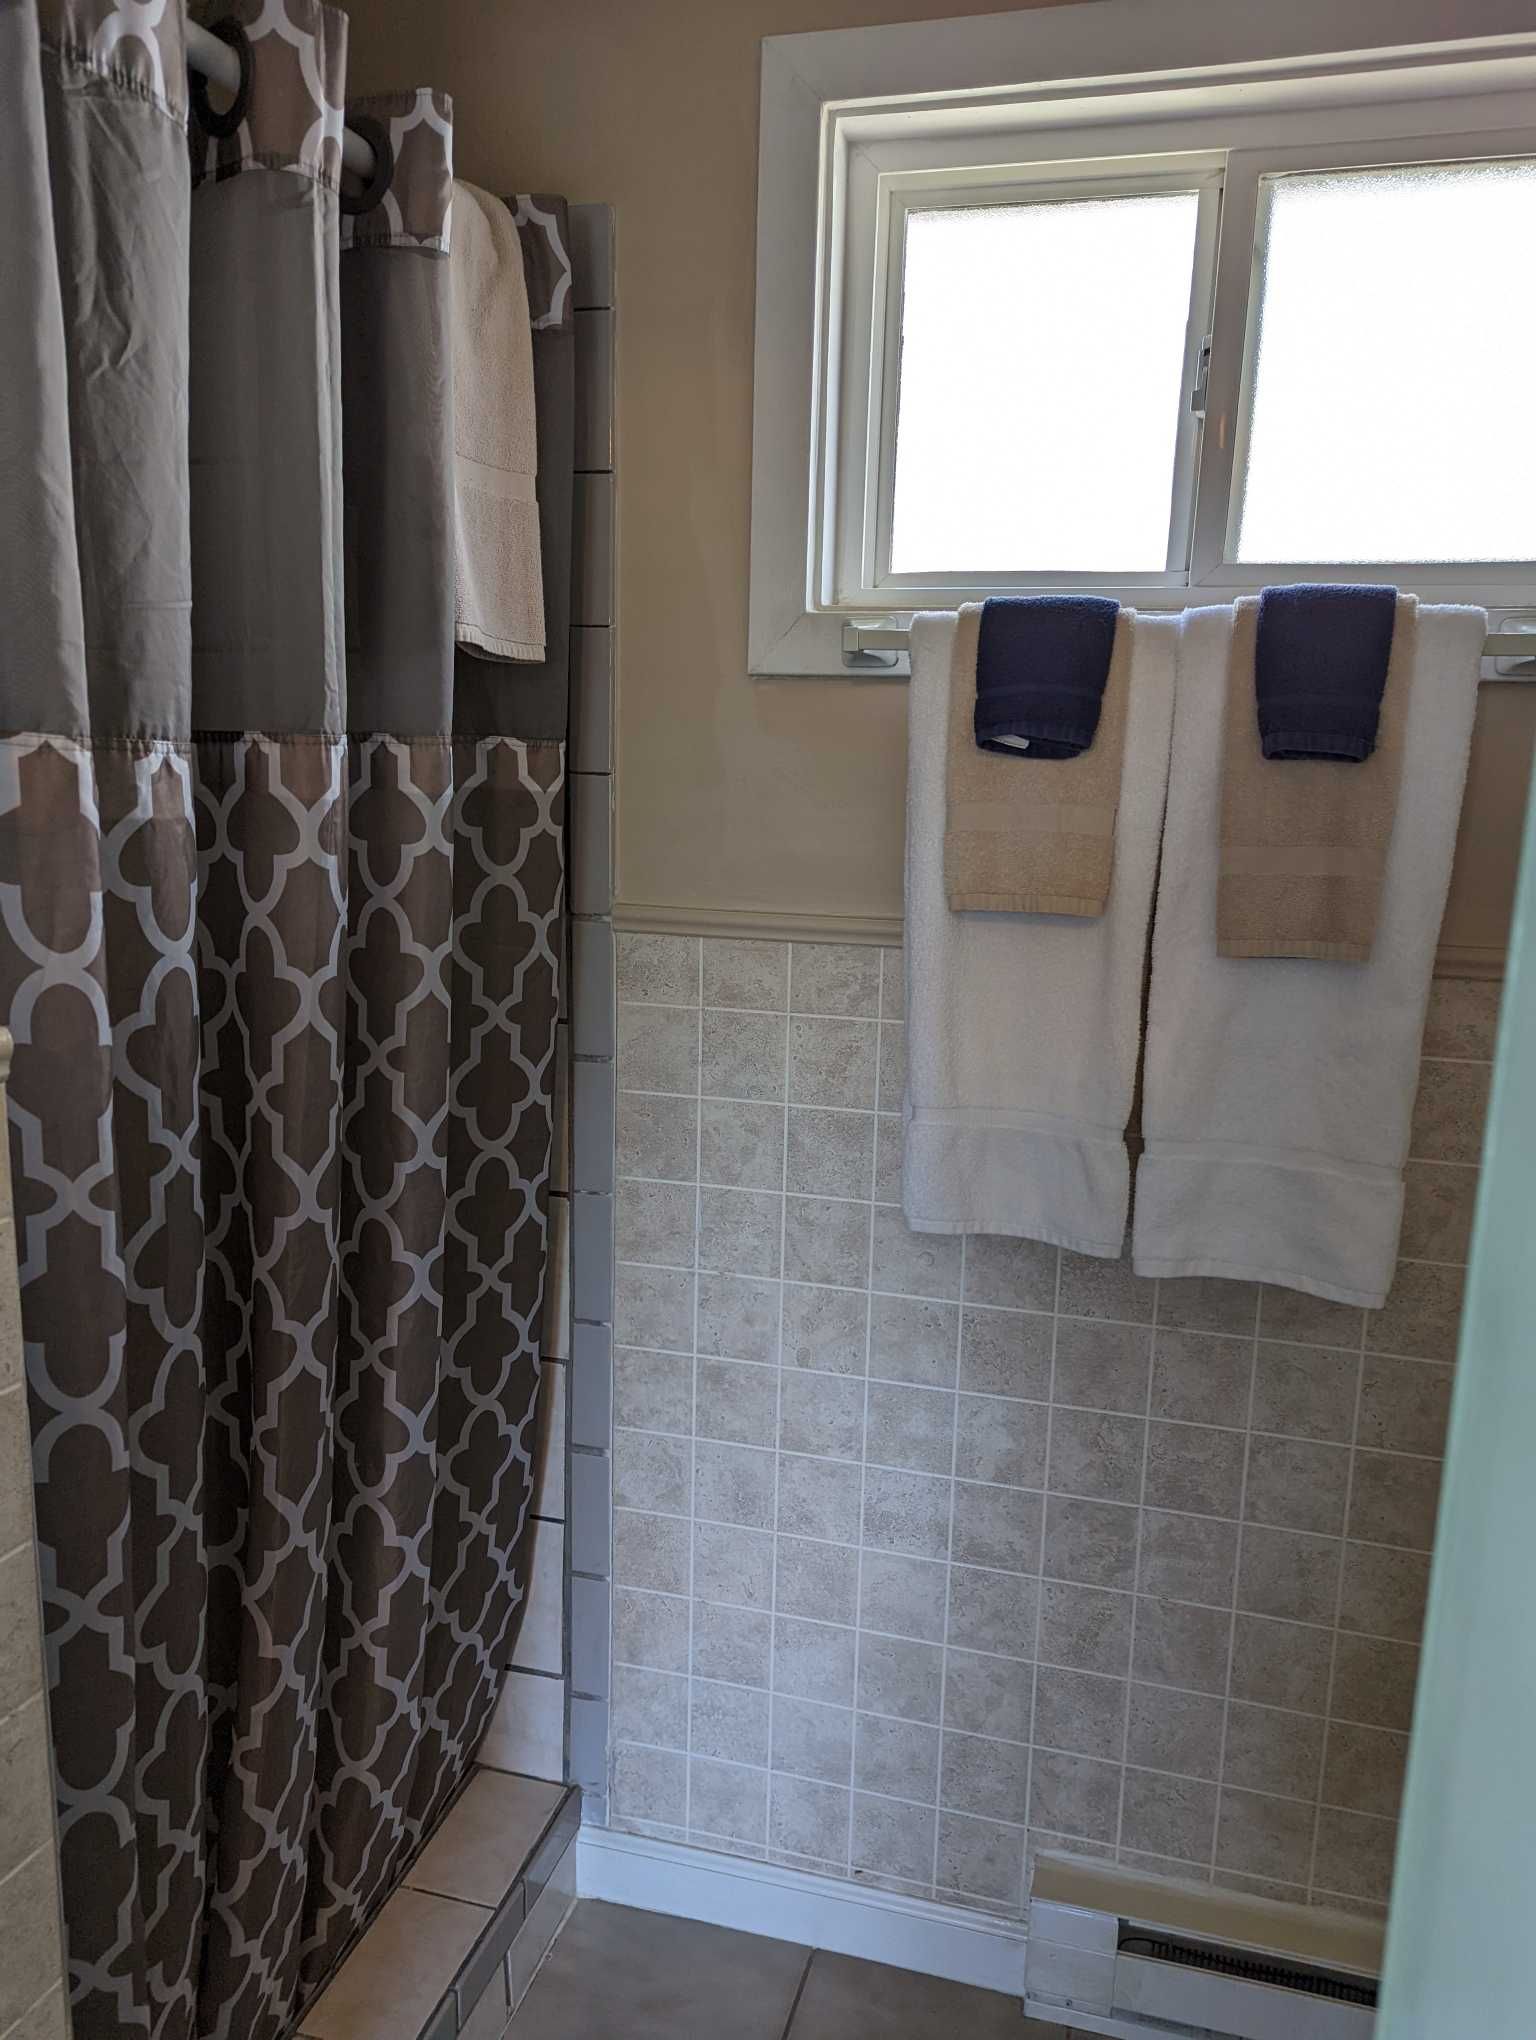 a tan bathroom with a shower stall covered by a brown bathroom curtain